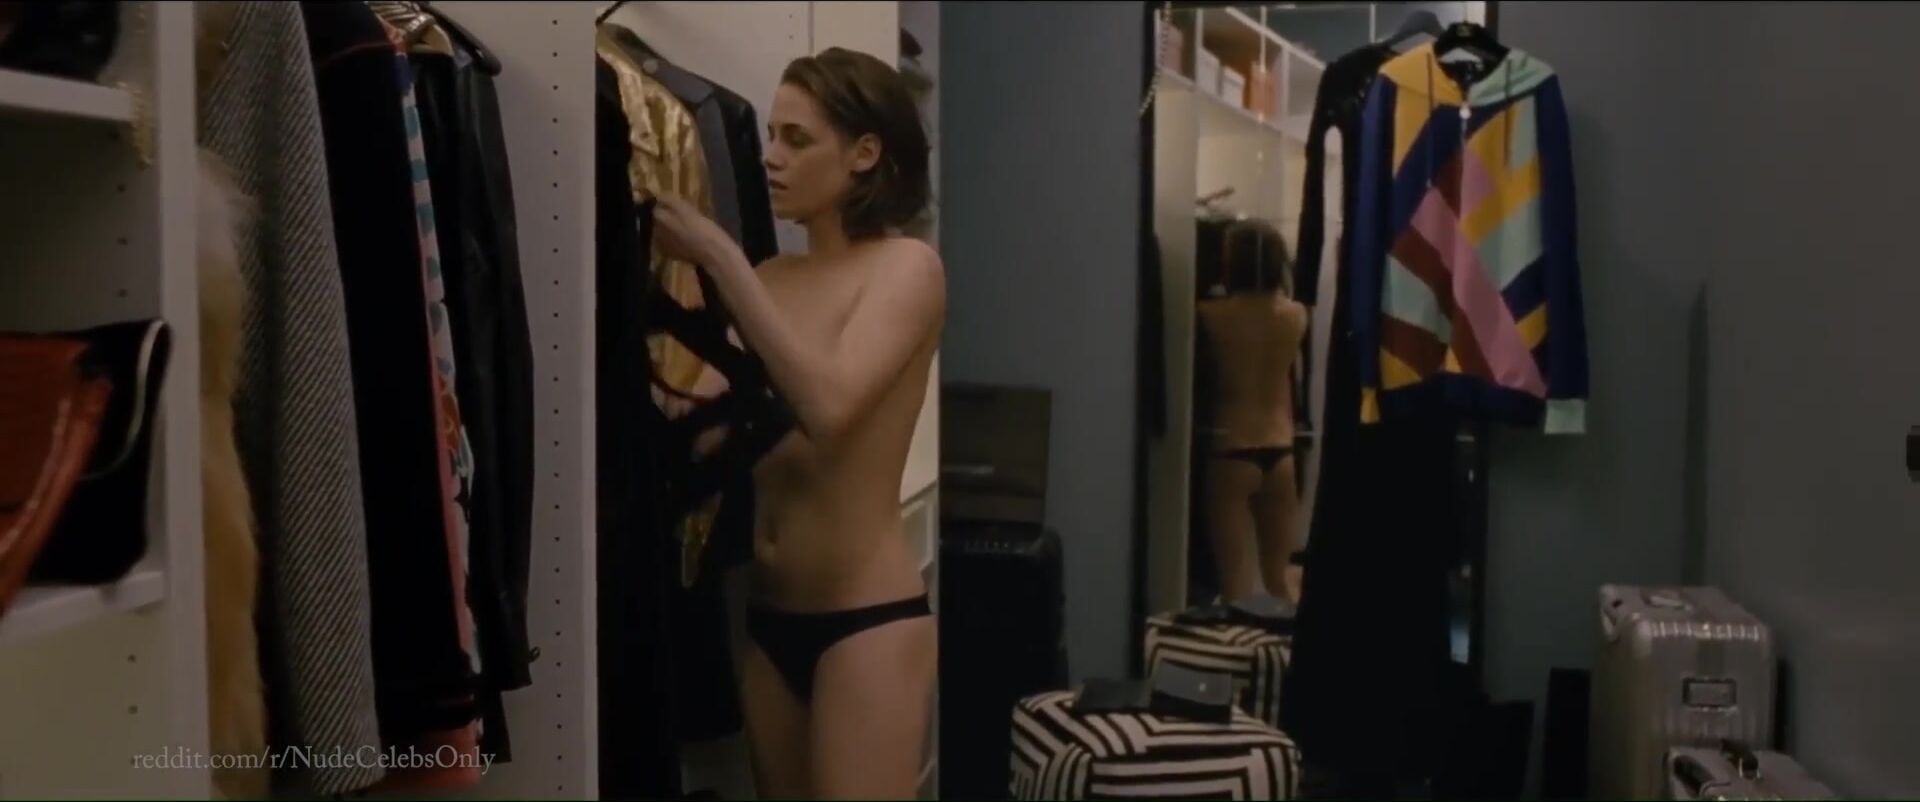 Titjob Celebs video HD compilation of hot movie star Kristen Stewart starring in the nude English - 1